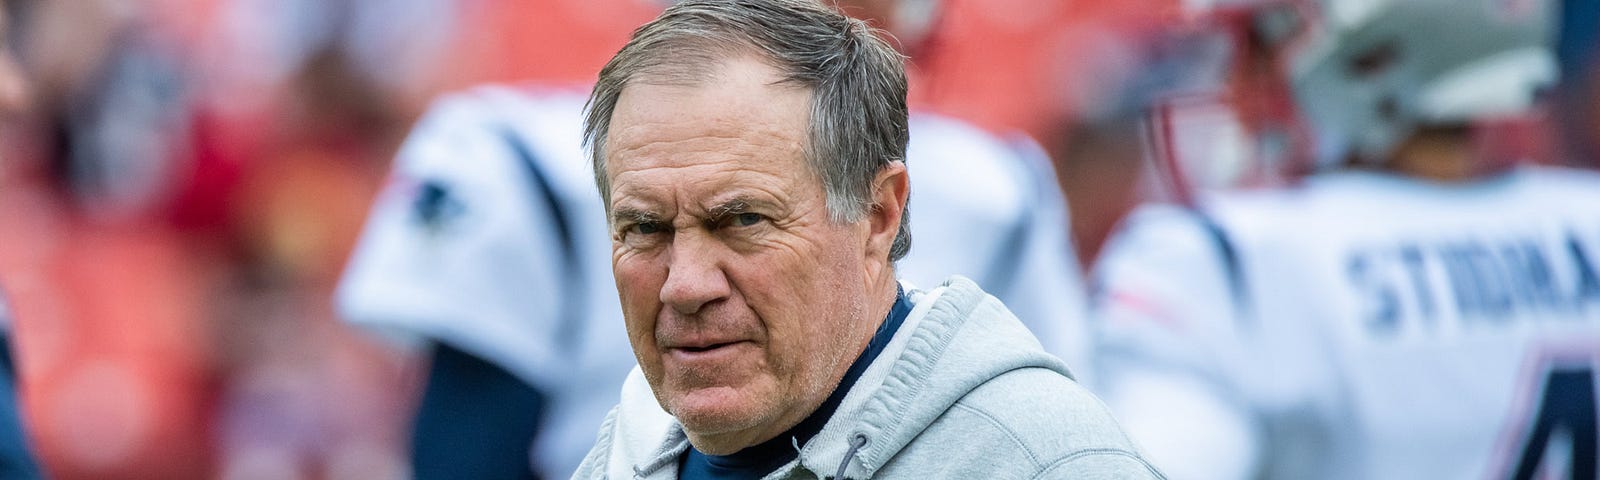 Photo of Coach Bill Belichick of New England Patriots NFL team walking around at practice in sweats